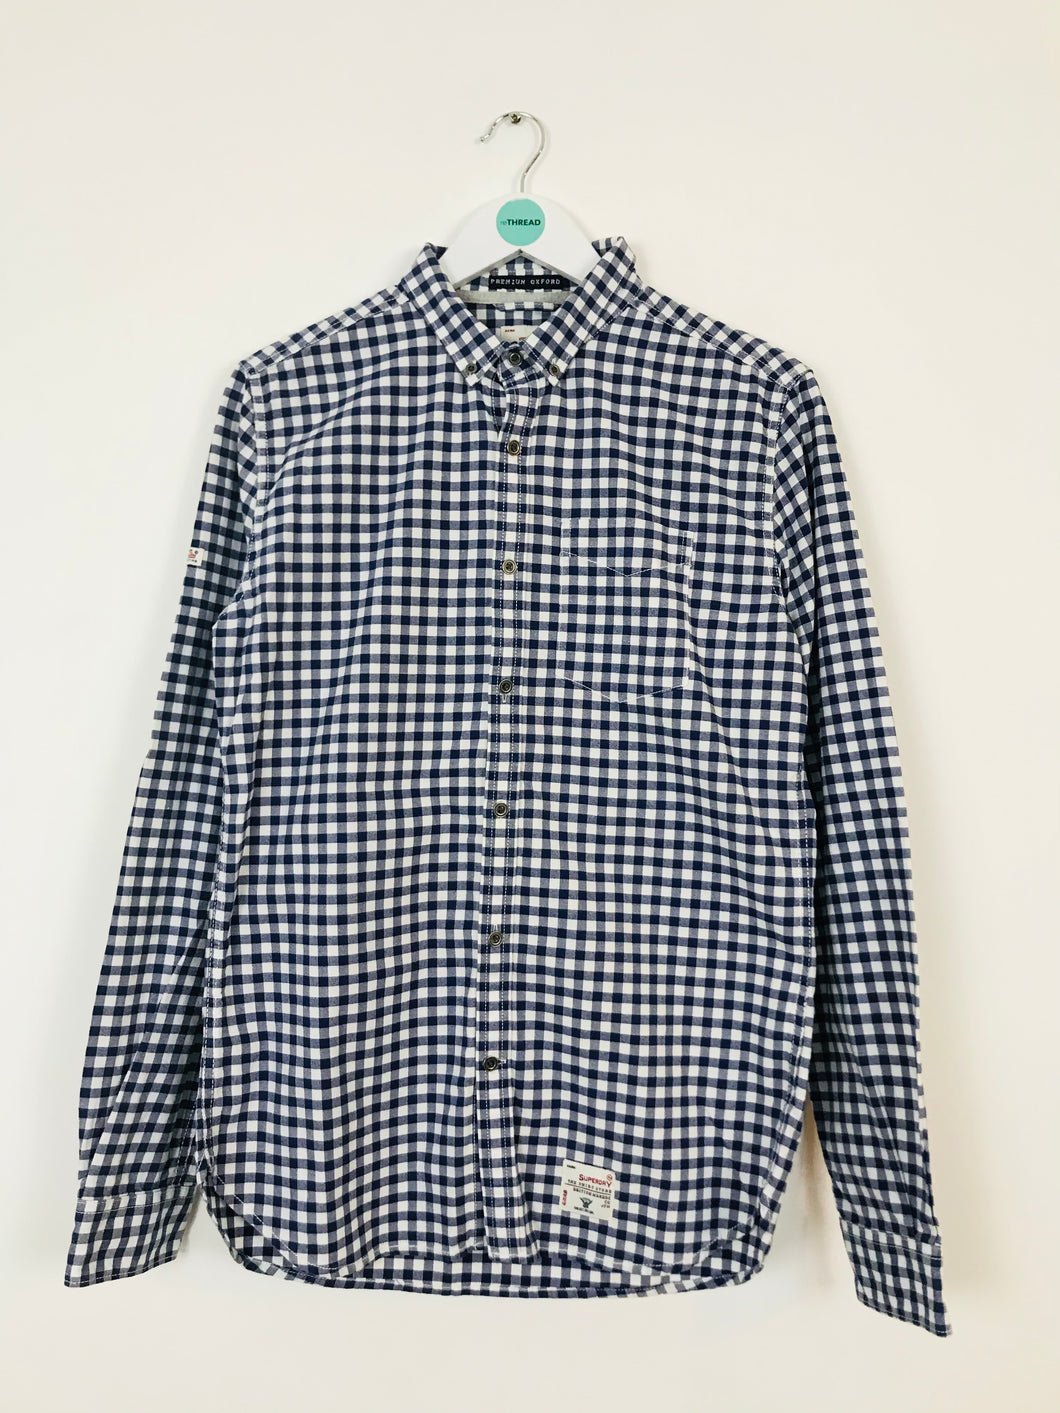 Superdry Mens Check Shirt | S | Navy and White